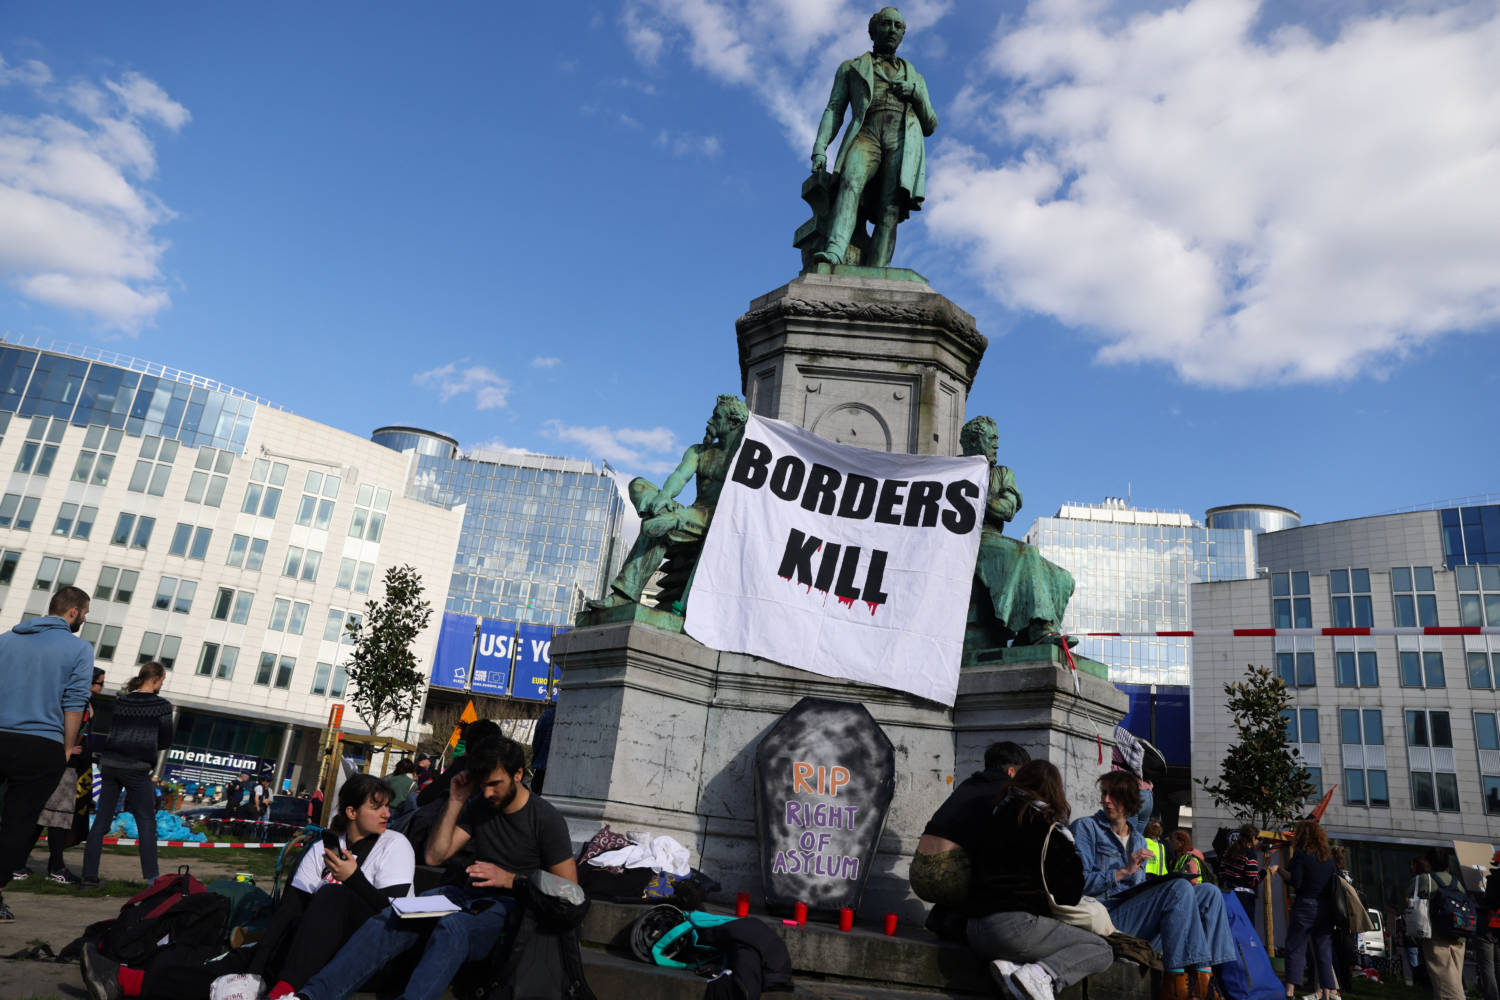 Human Rights Activists Protests Outside The Eu Parliament Over Vote On New Asylum Rules, In Brussels